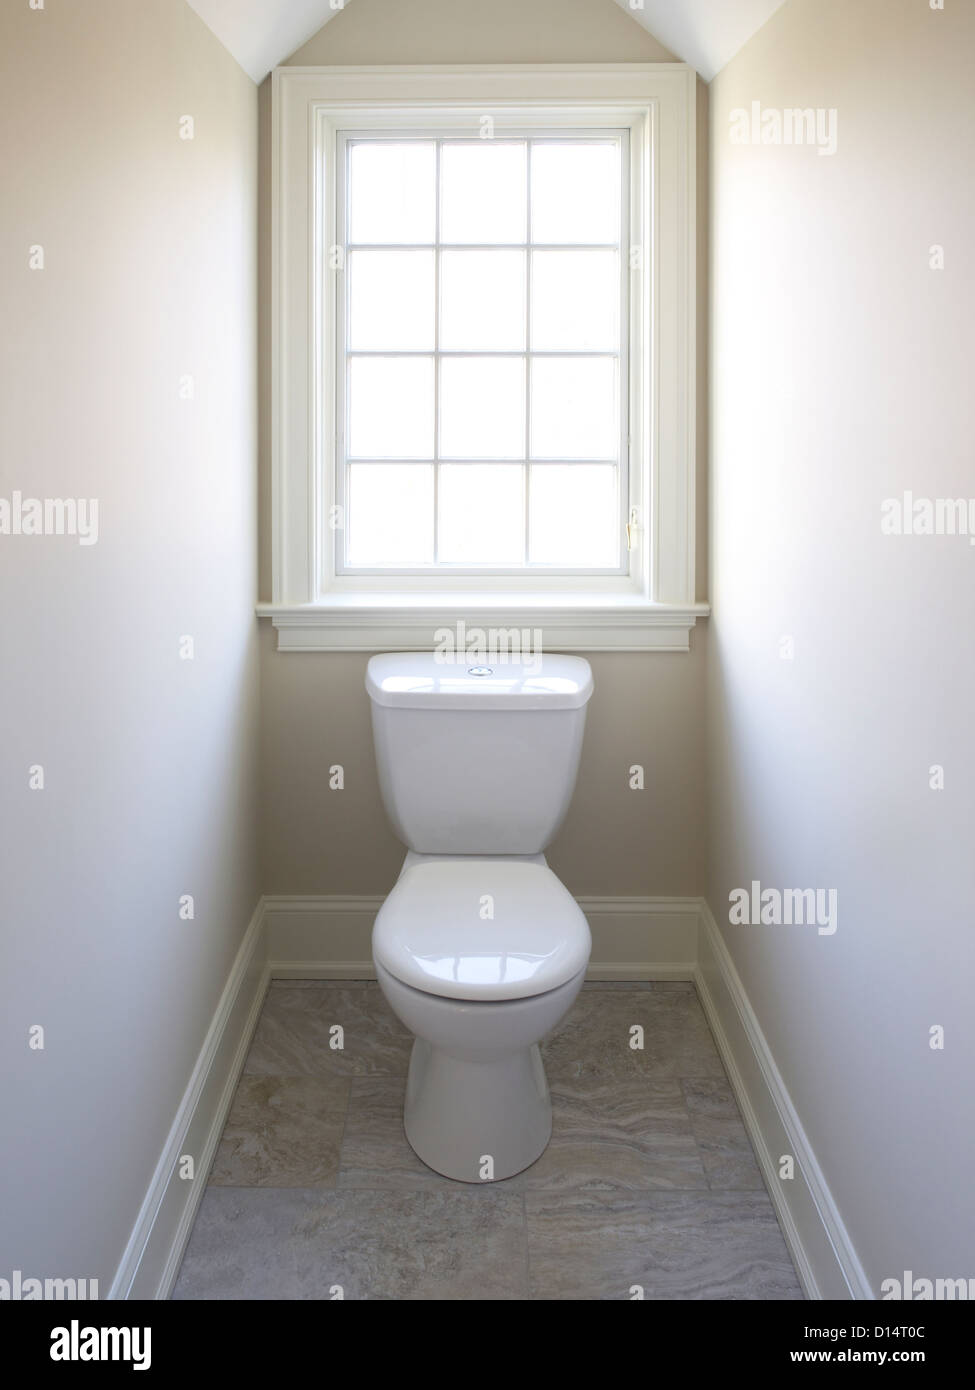 Toilet & Window In Very Small Room Stock Photo